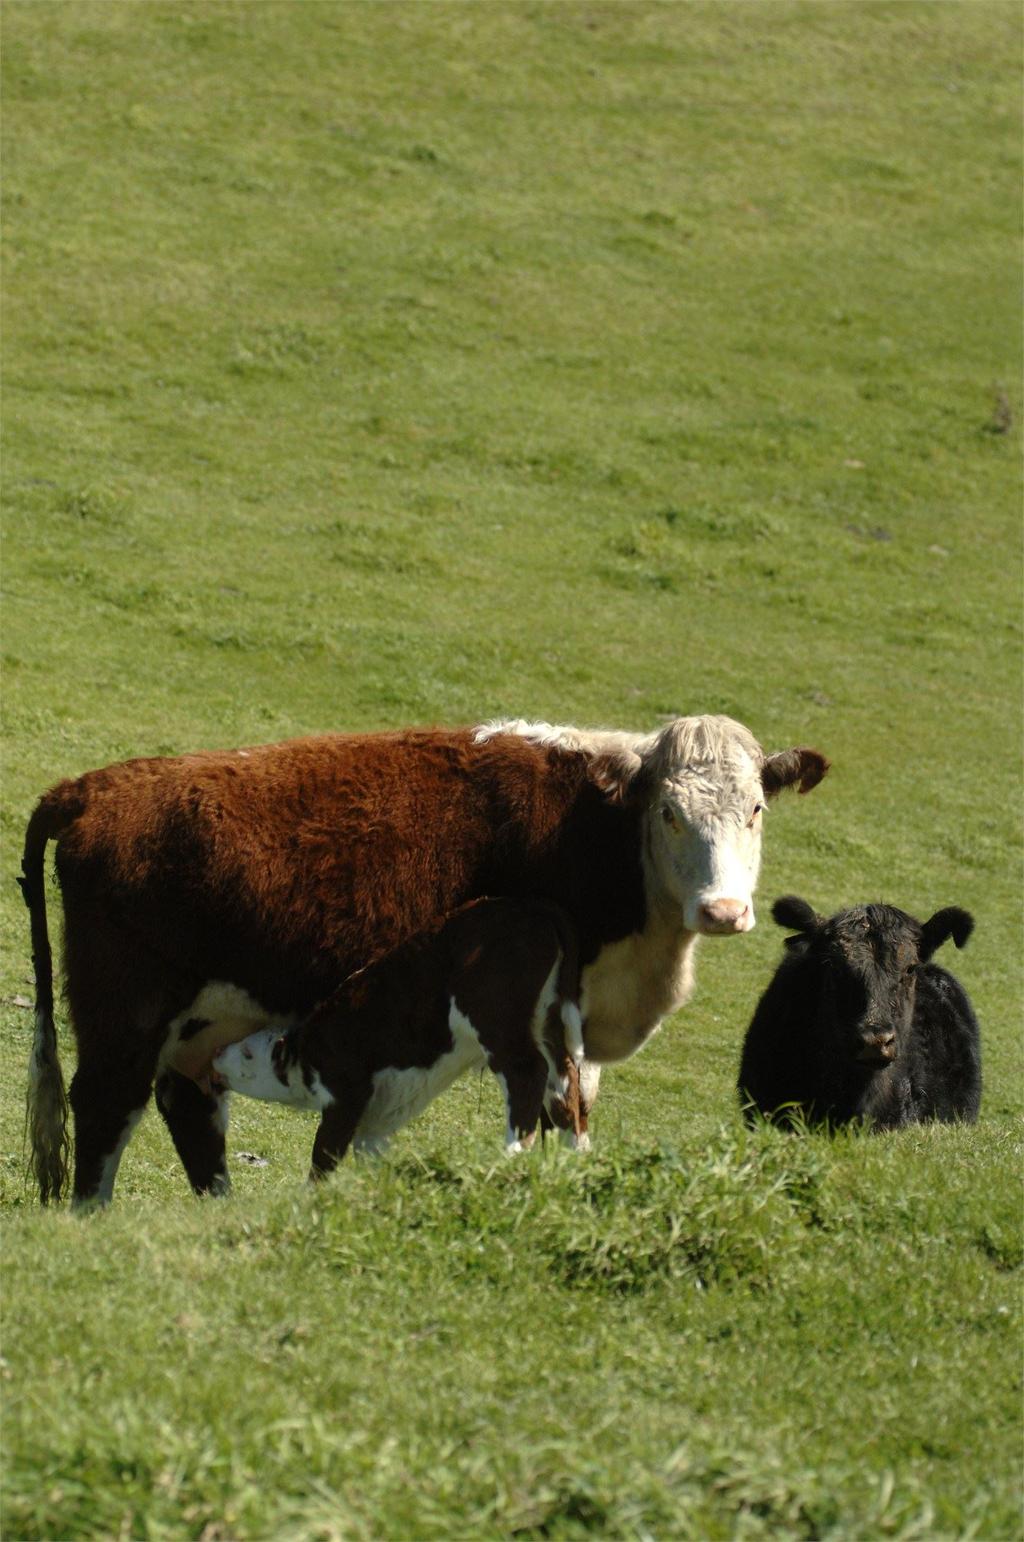 Traits that are economically important and are heritable should be included in the breeding objective of beef herds.